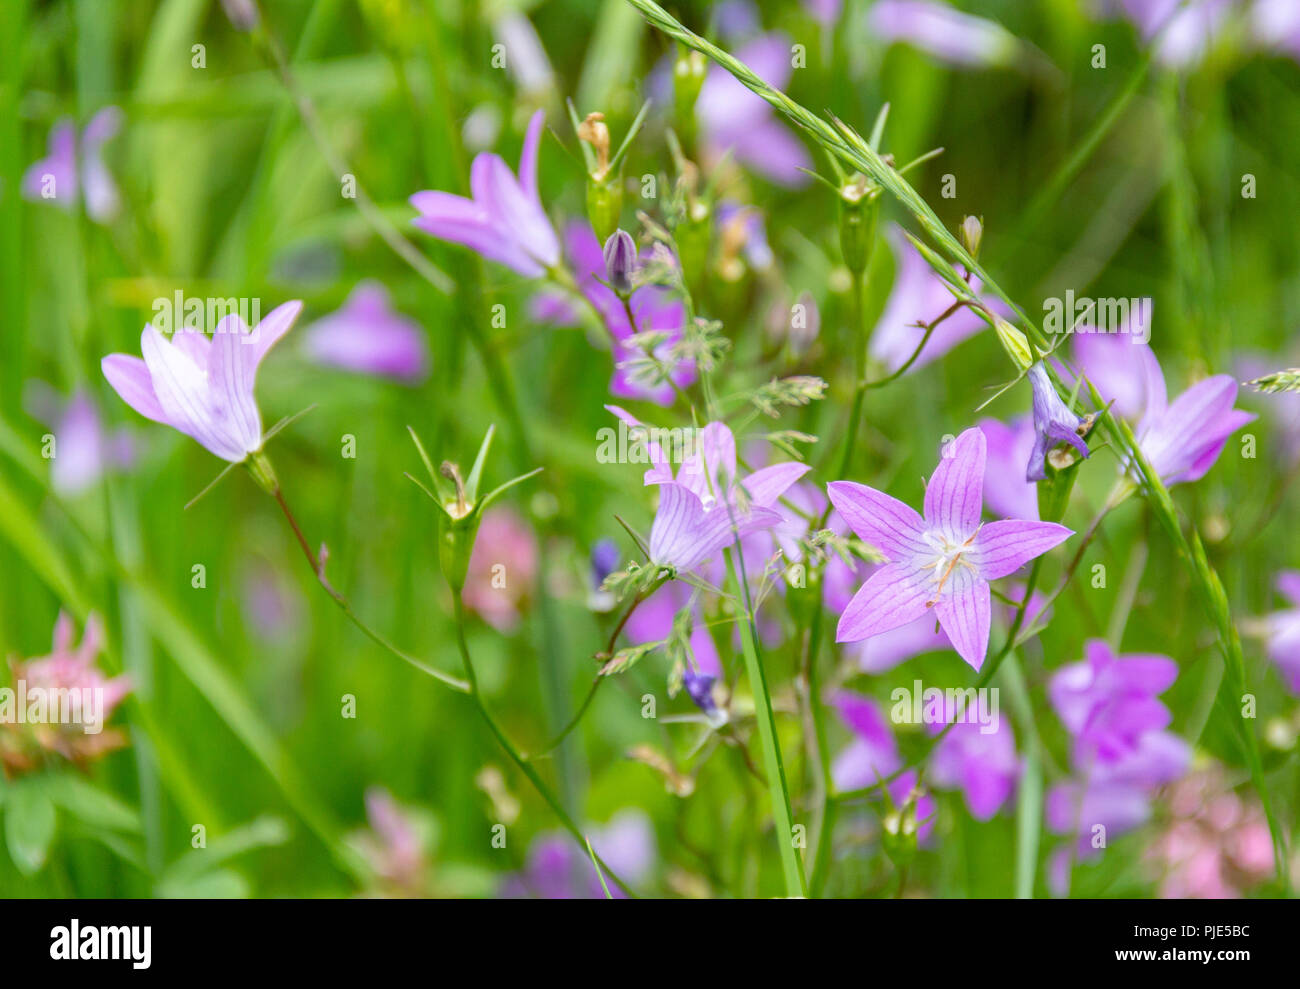 closeup shot of some violet spreading bellflowers in a meadow at spring time Stock Photo